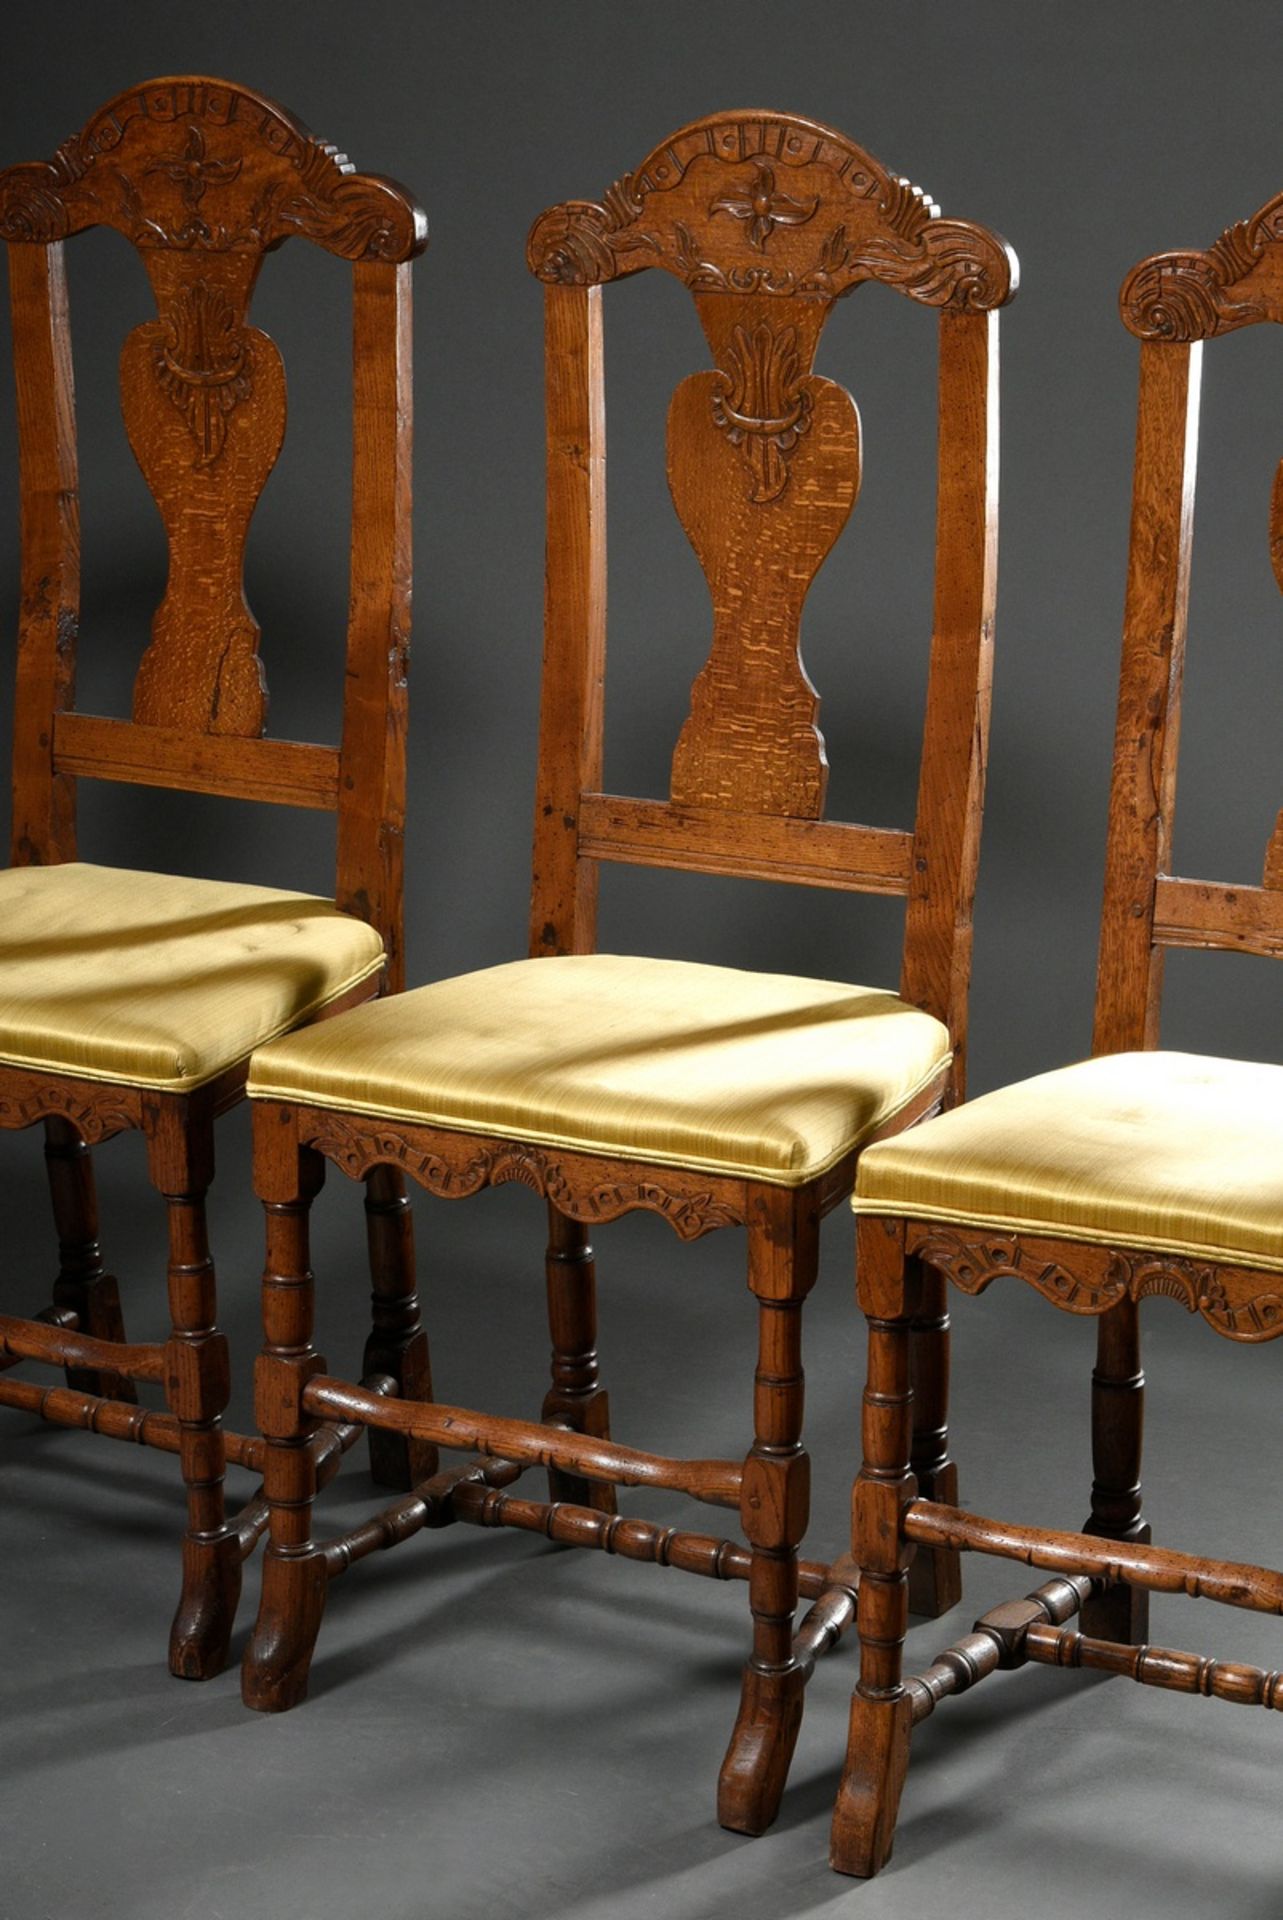 4 Flensburg Baroque chairs with floral carved back board, oak, 1st half 18th c., h. 48/110cm - Image 2 of 7